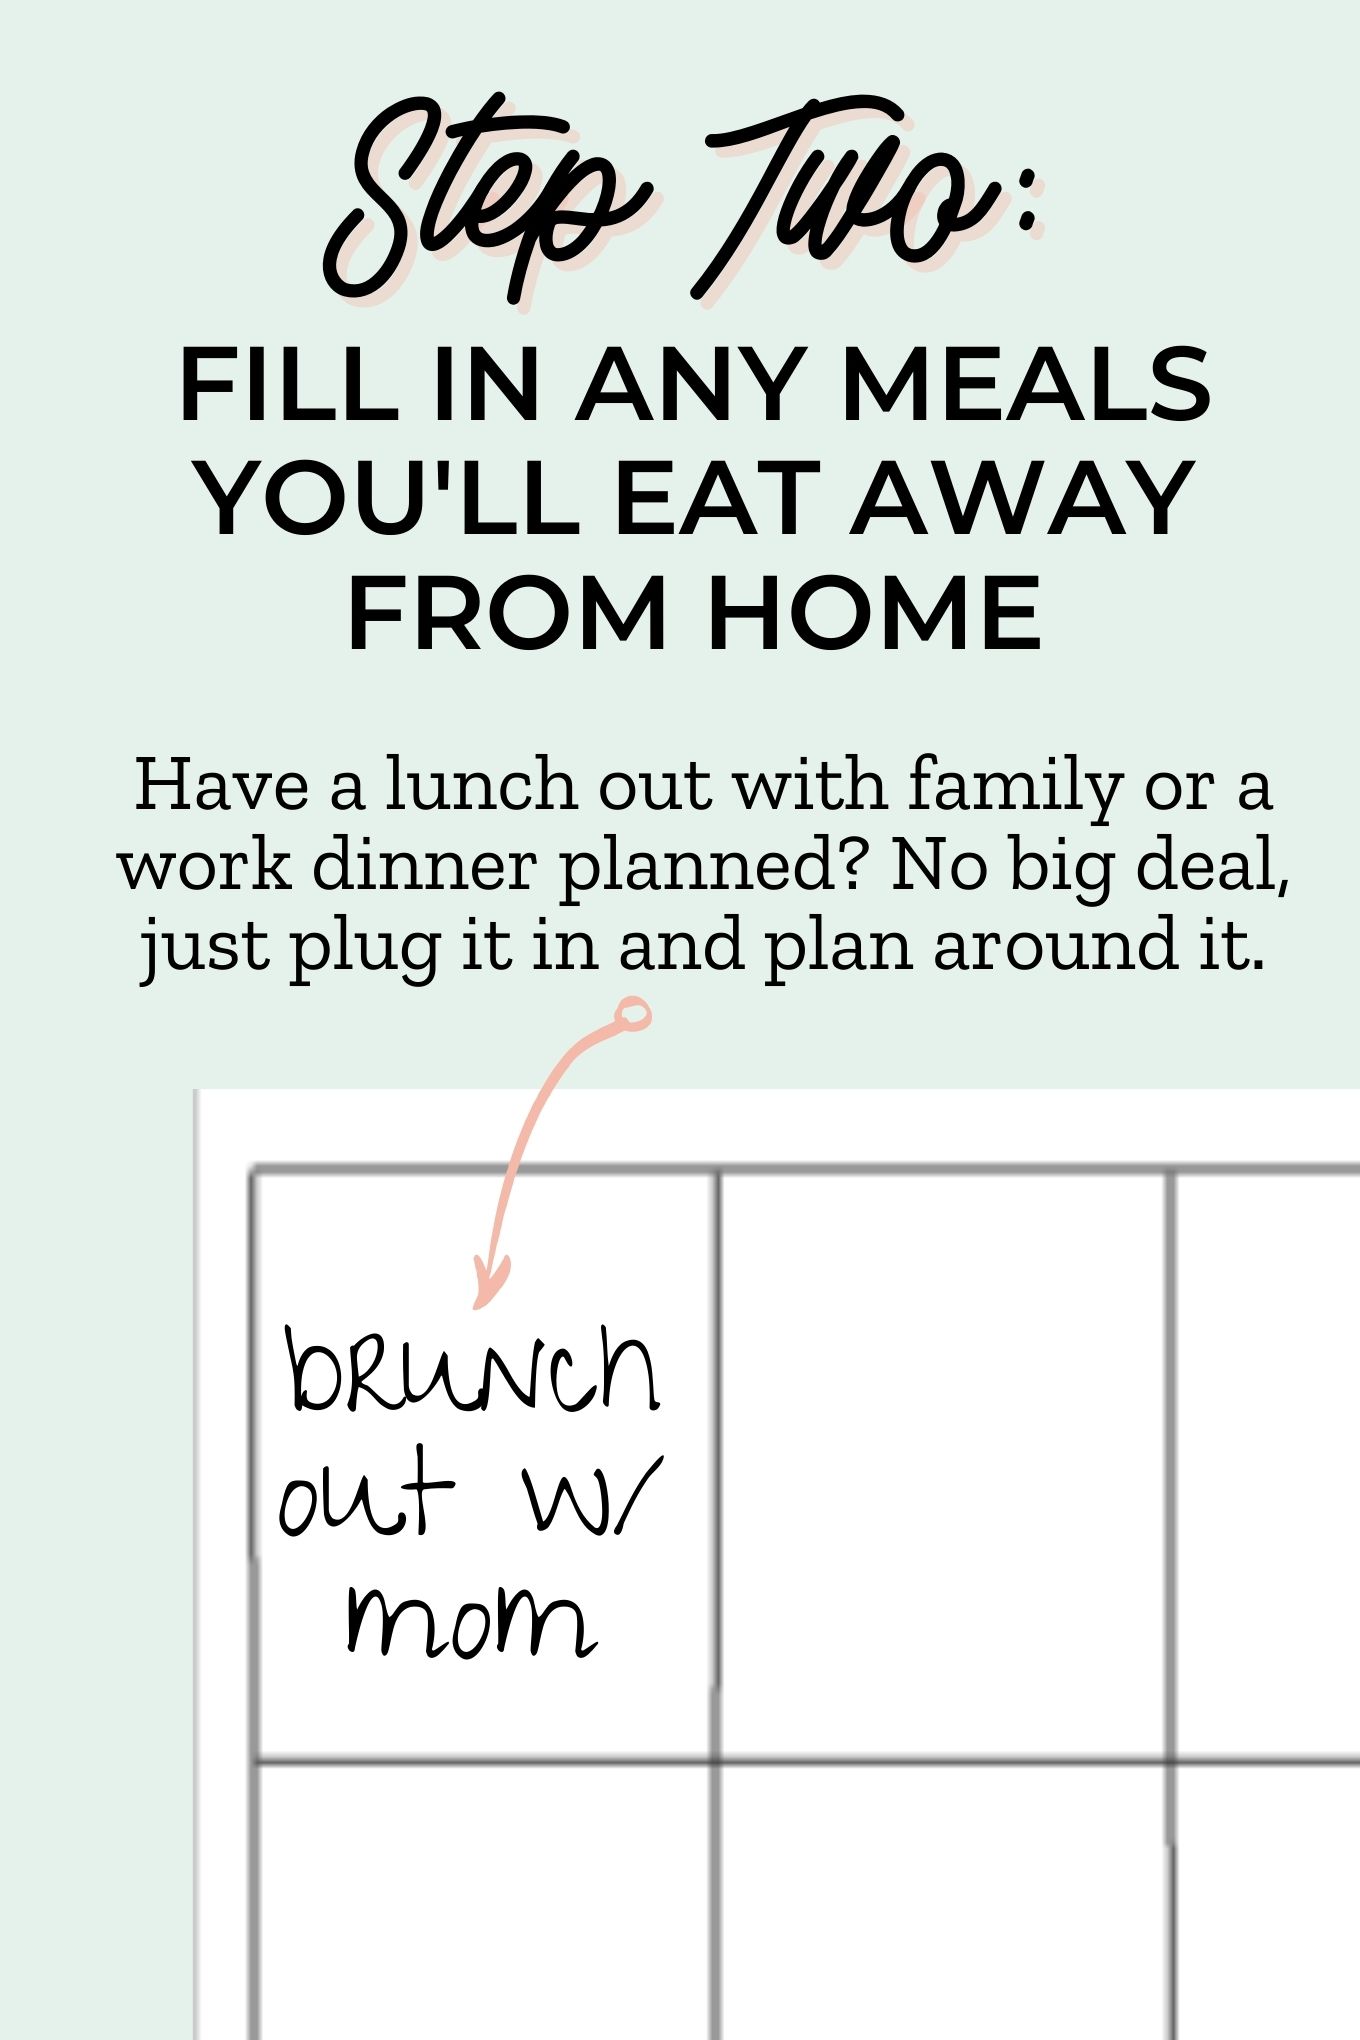 https://www.forkintheroad.co/wp-content/uploads/2021/01/create-weekly-meal-plan-step2.jpg